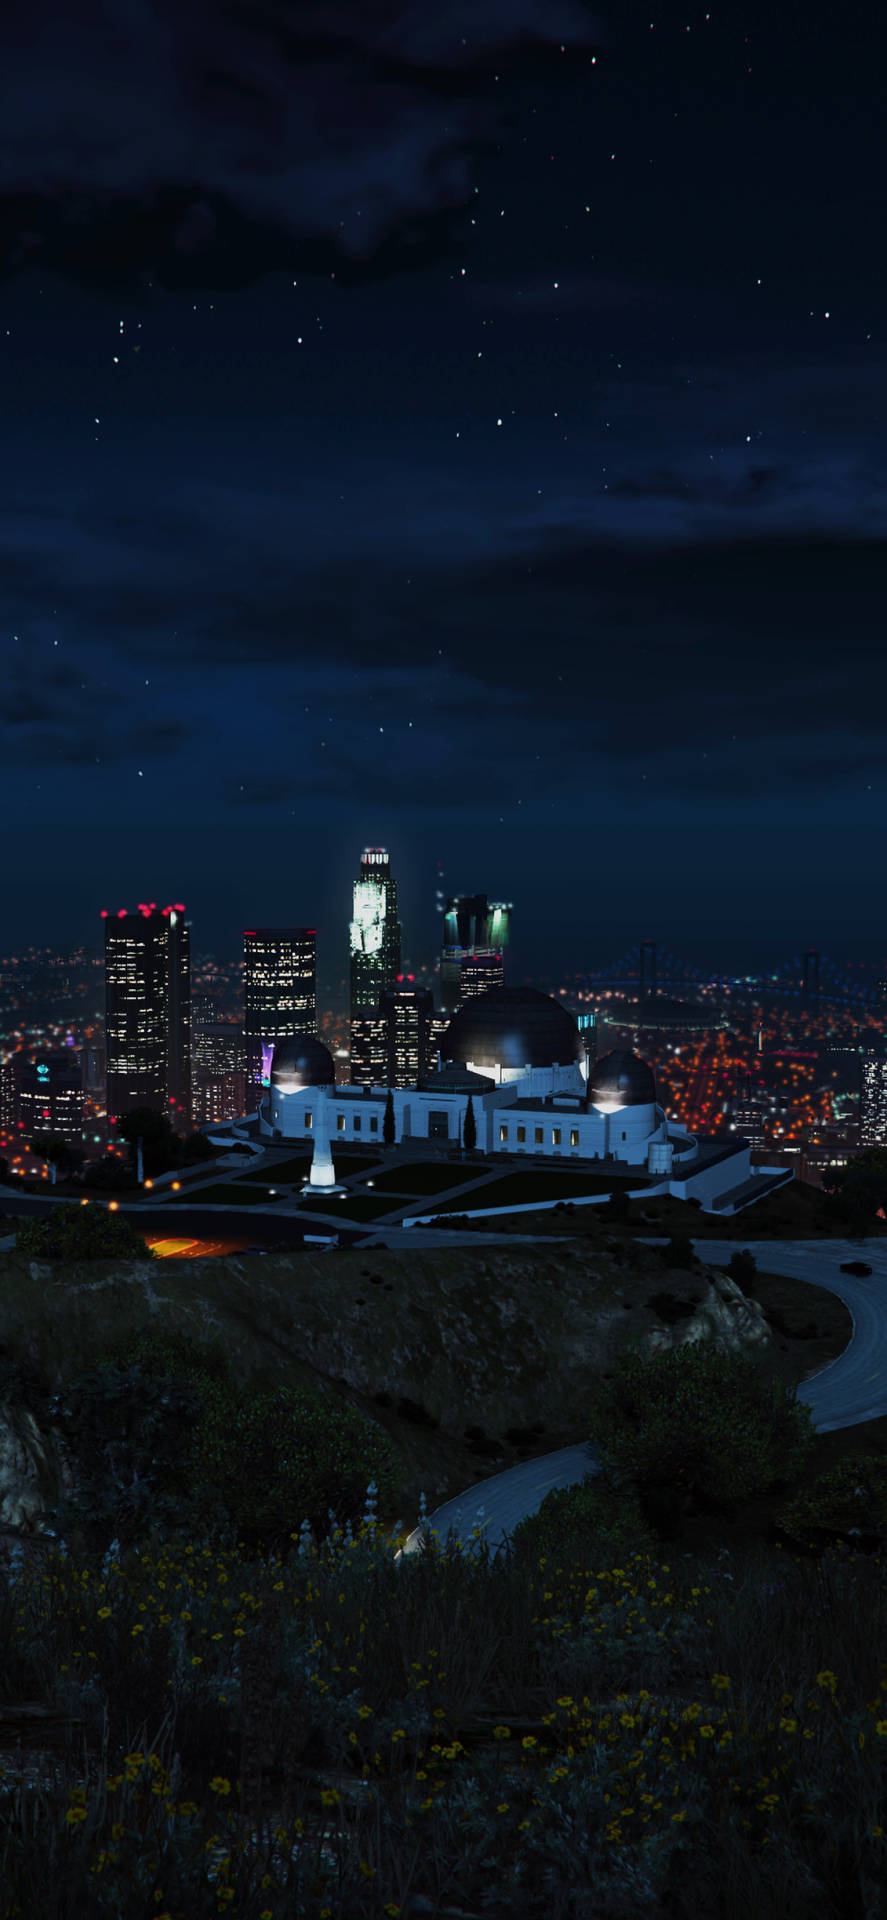 Get ready to start playing GTA 5 on your iPhone Wallpaper